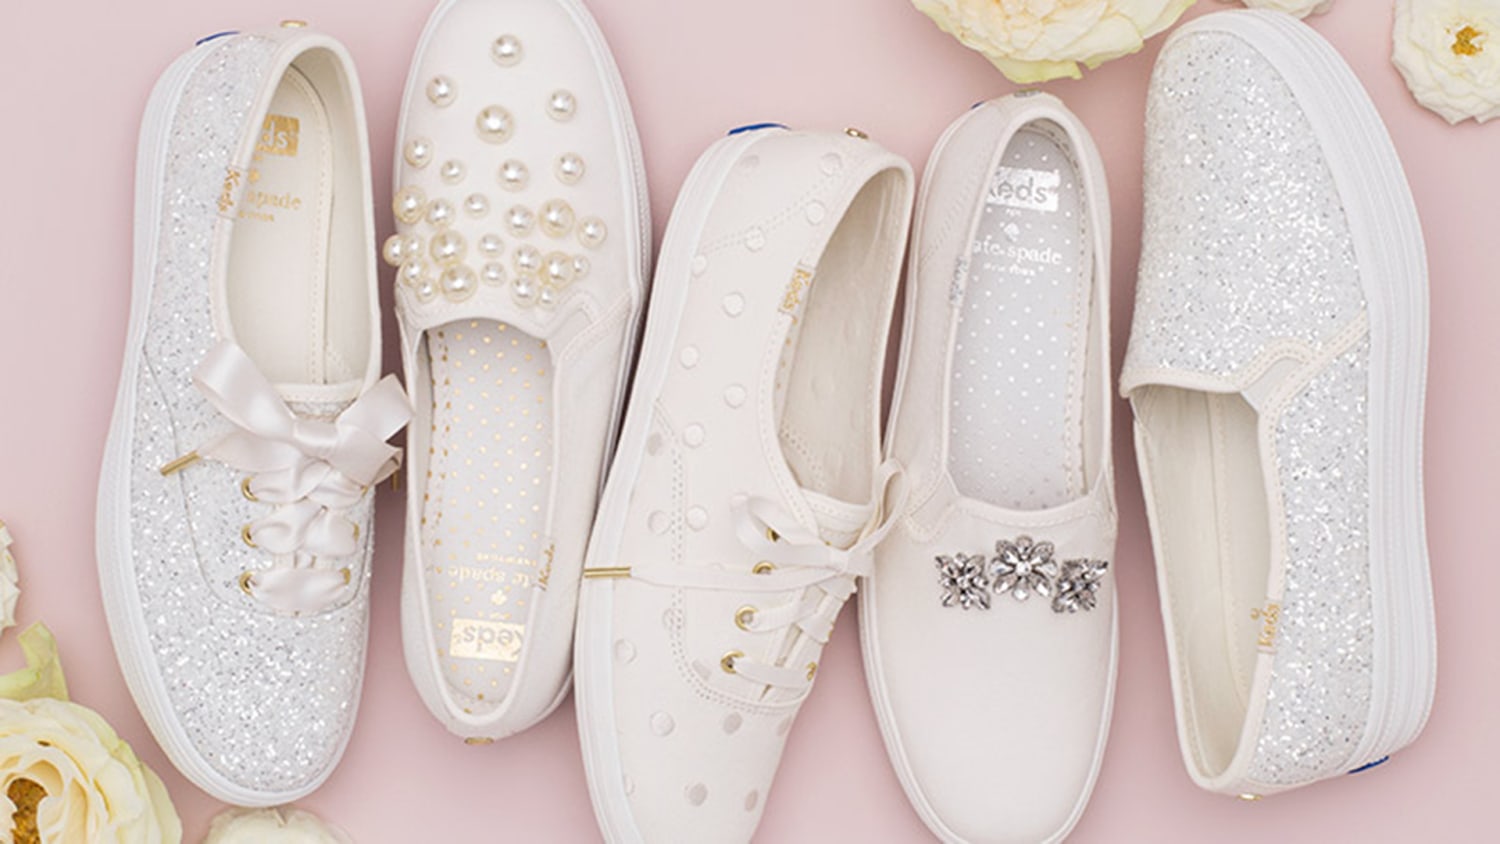 Keds and Kate Spade created a sneakers wedding collection